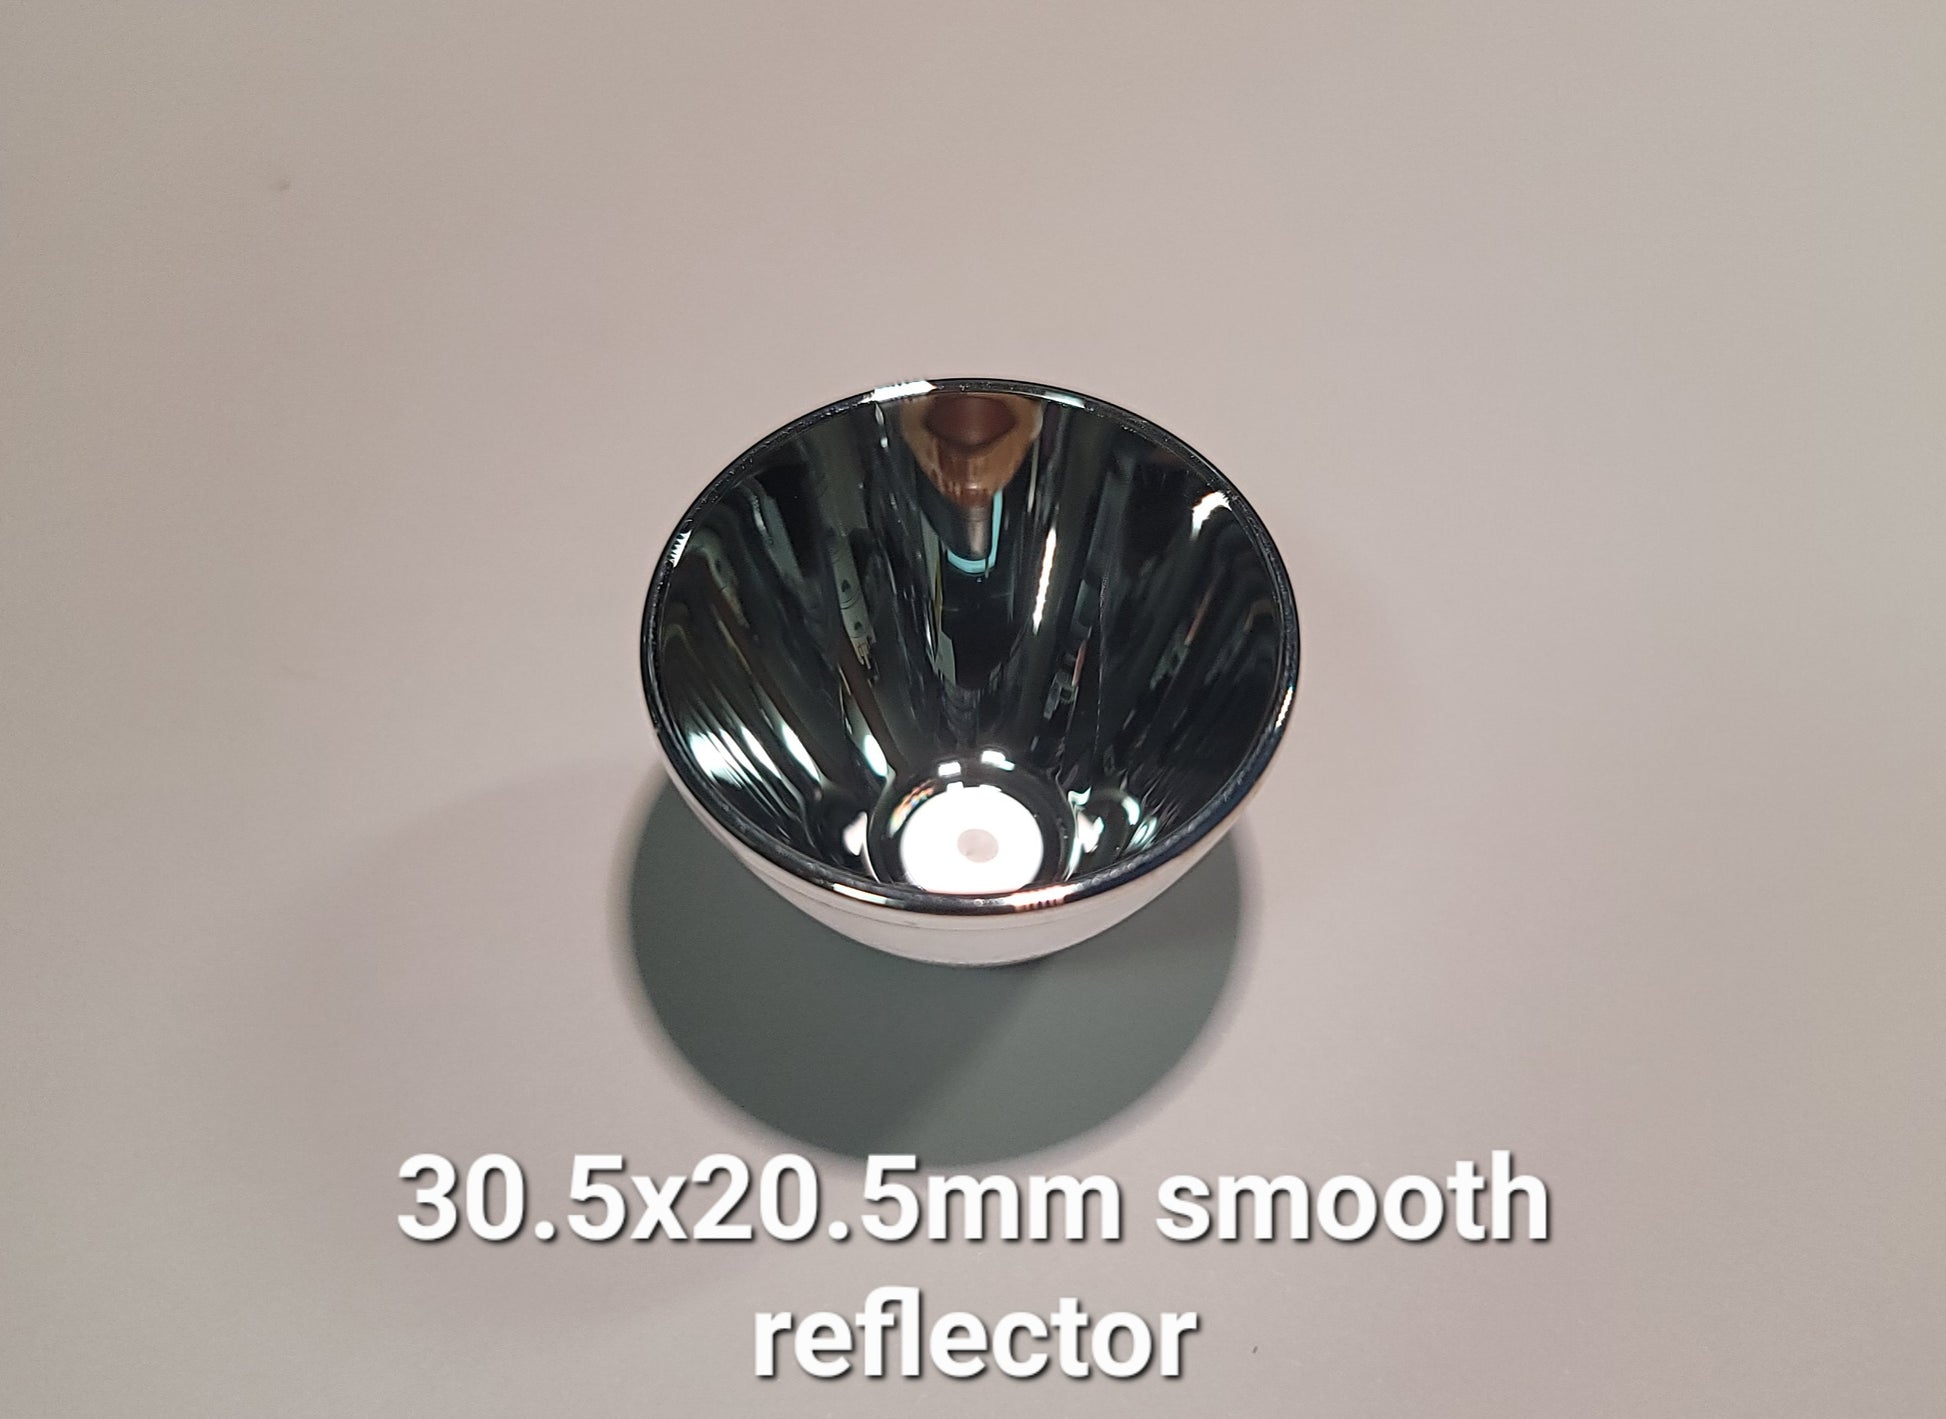 Aluminum Reflector Smooth or OP 30.5 X 20.5MM SMOOTH 7MM LED OPENING 3030/3535 SMD (KR1/D1)